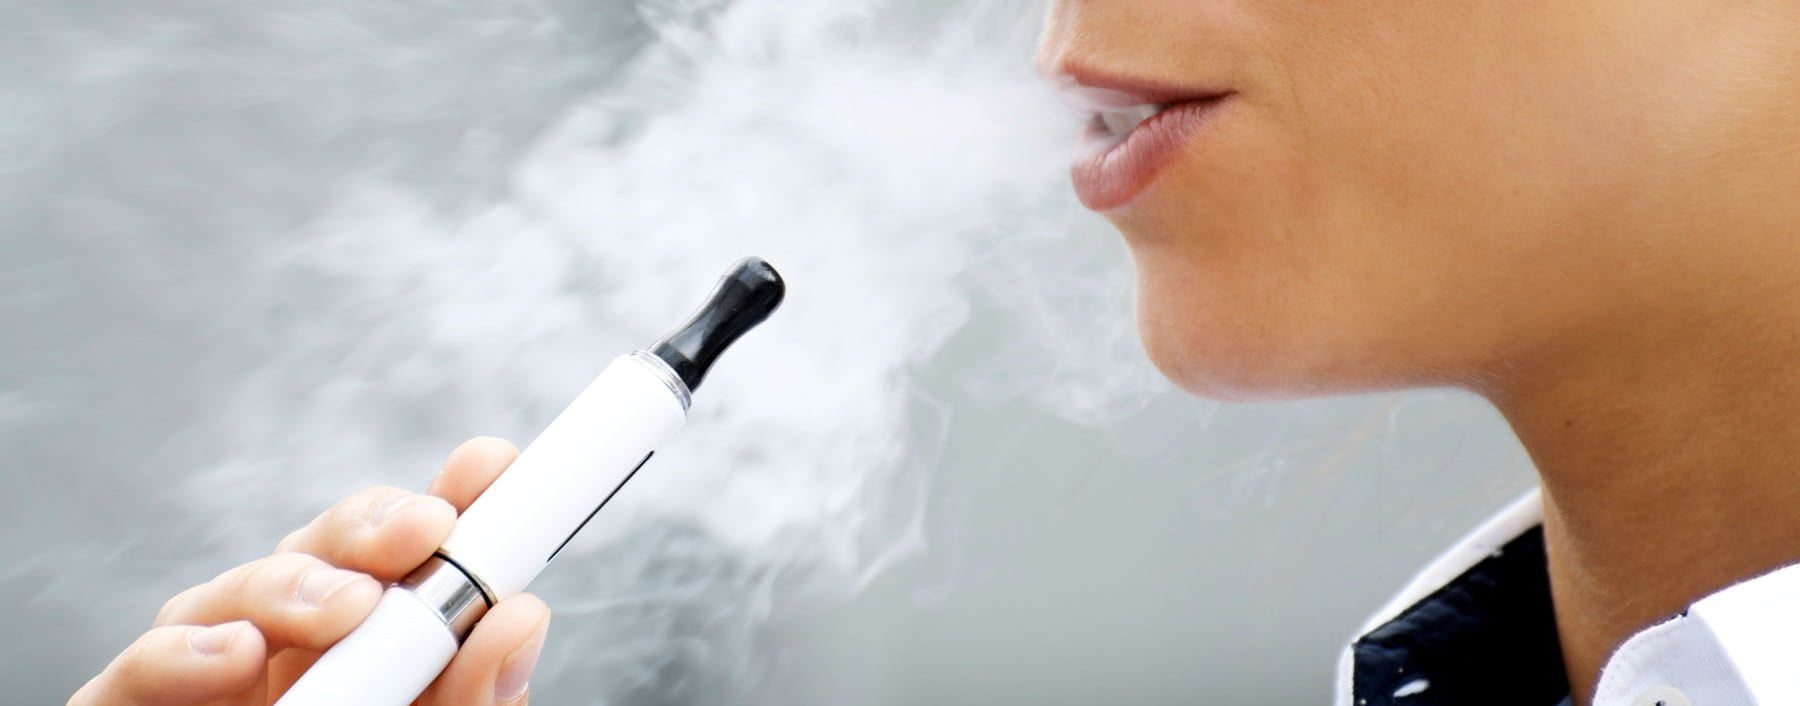 E Cigarettes More Or Less Effective Than Nicotine Patches In Study E1426455309435 مجلة نقطة العلمية